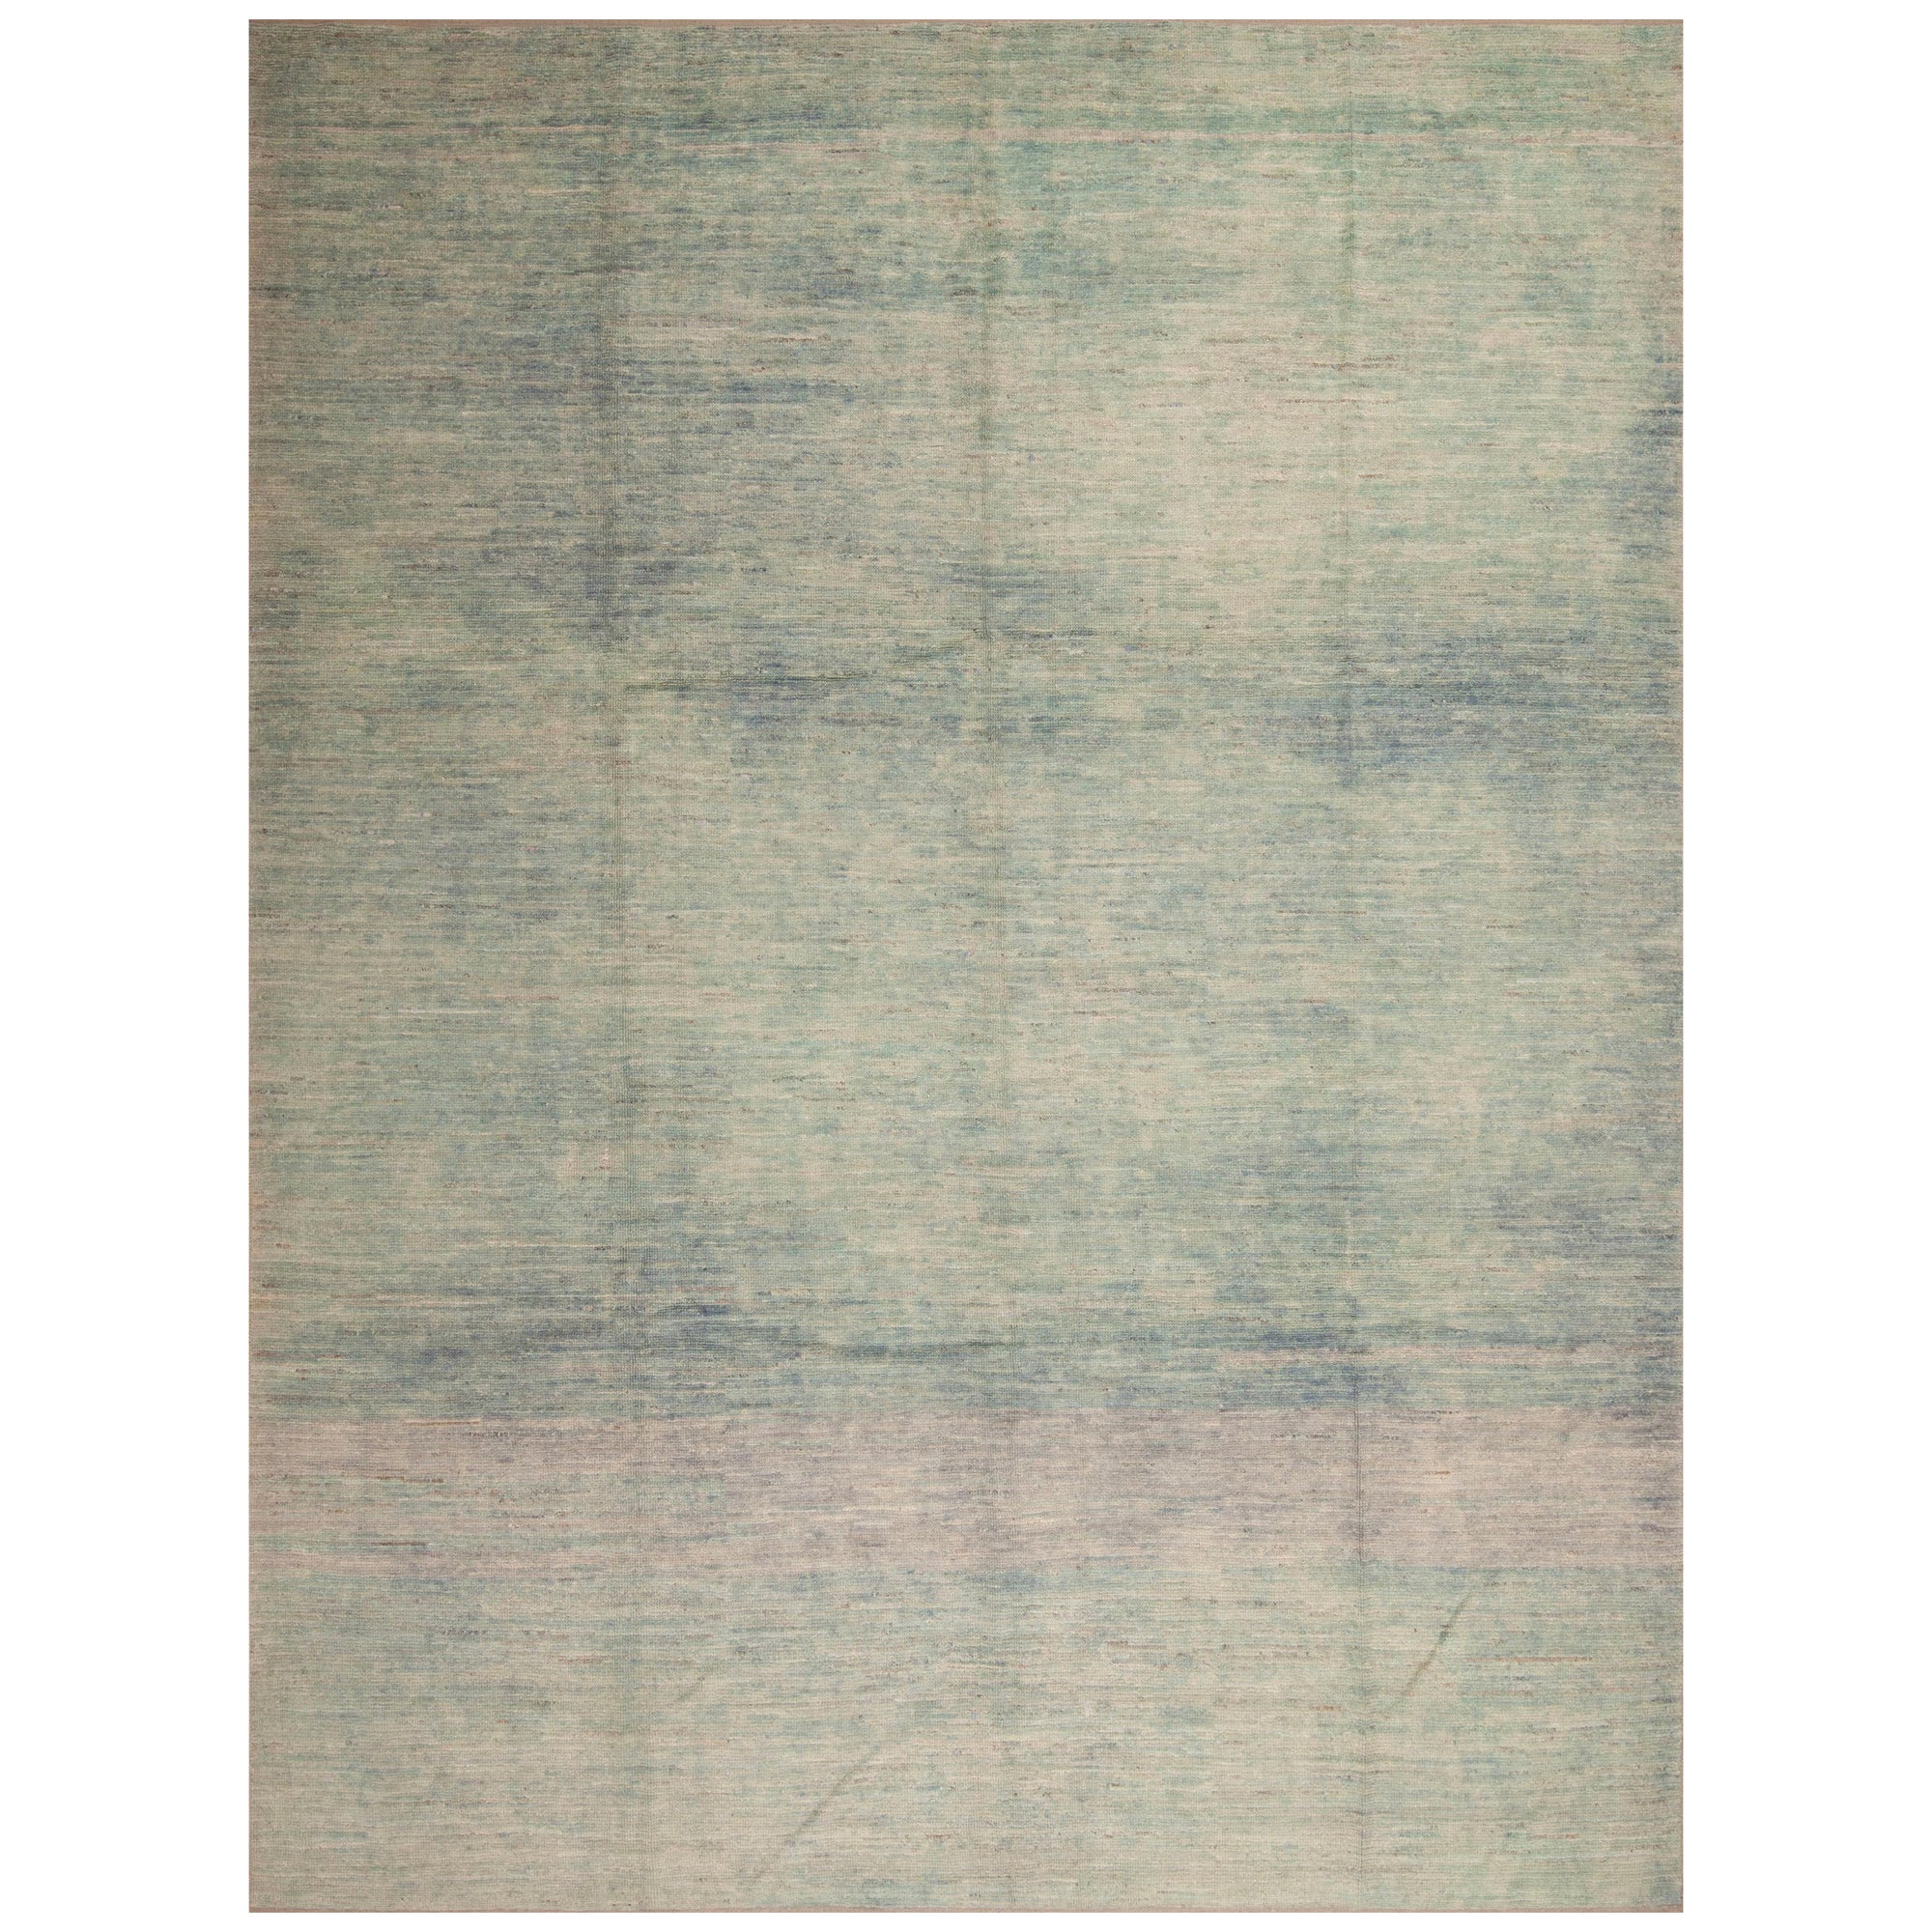 Nazmiyal Collection Green Seafoam Color Artistic Modern Room Size Rug 9'3" x 12'